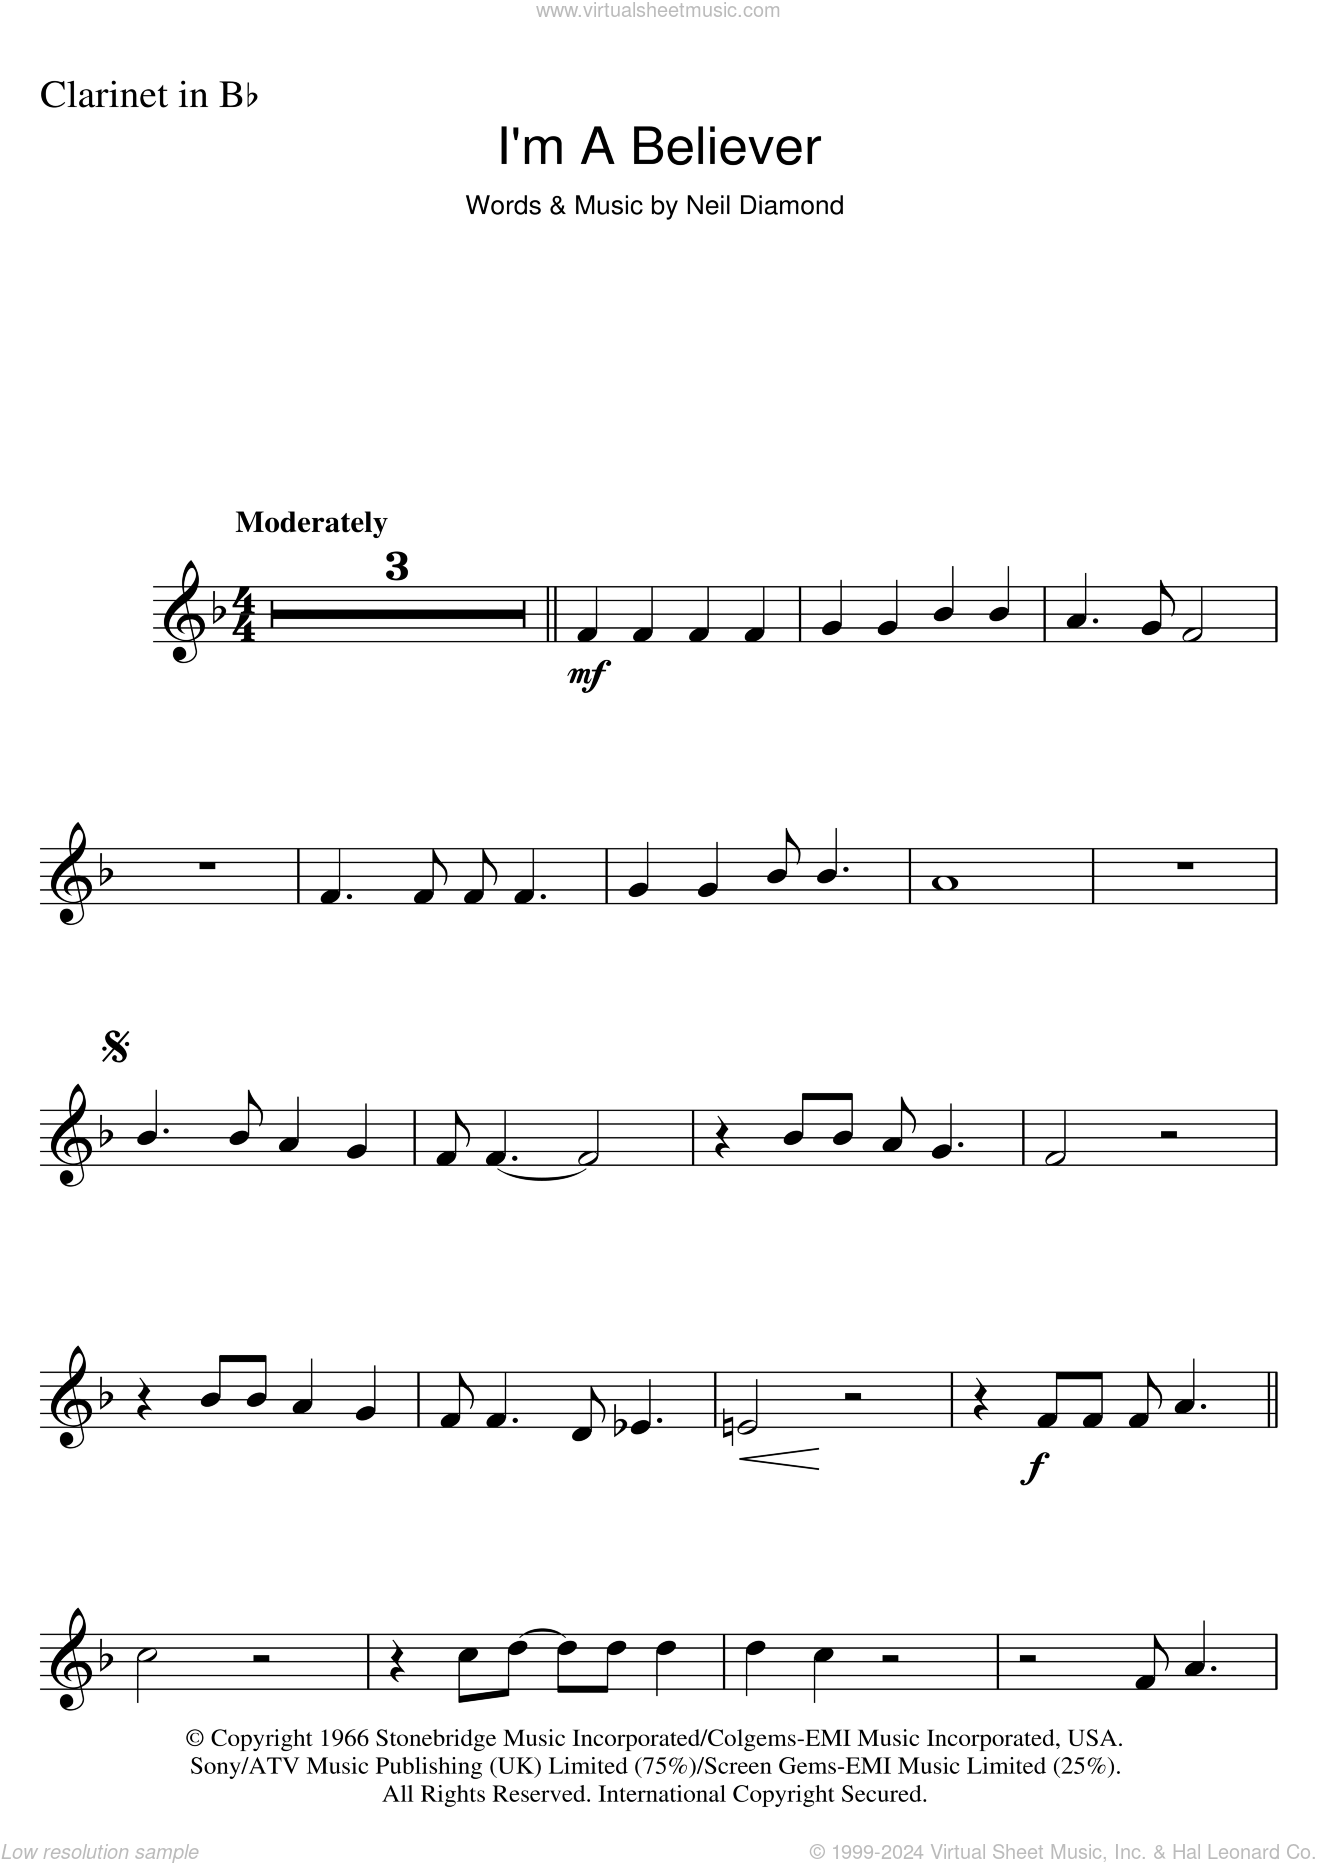 Diamond - I'm A Believer sheet music for clarinet solo PDF